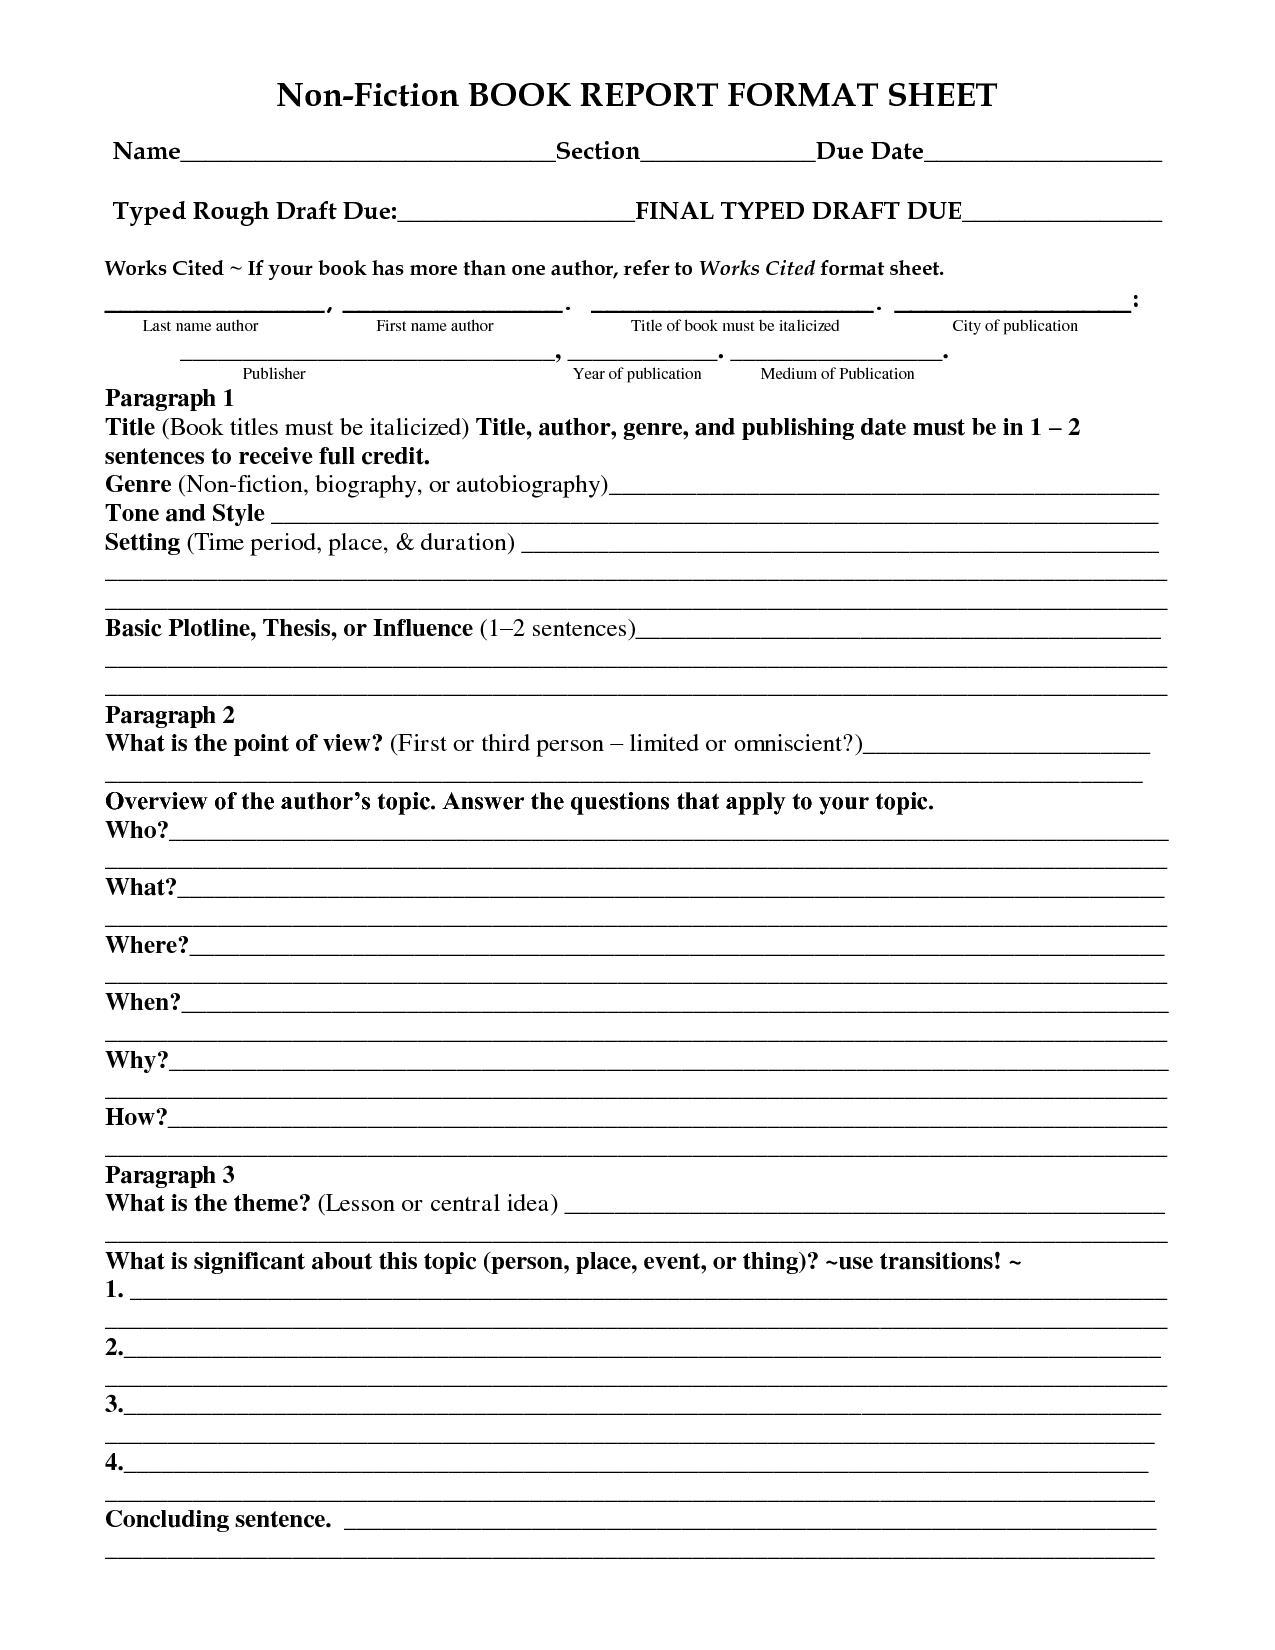 28 Images Of 5Th Grade Non Fiction Book Report Template For Nonfiction Book Report Template